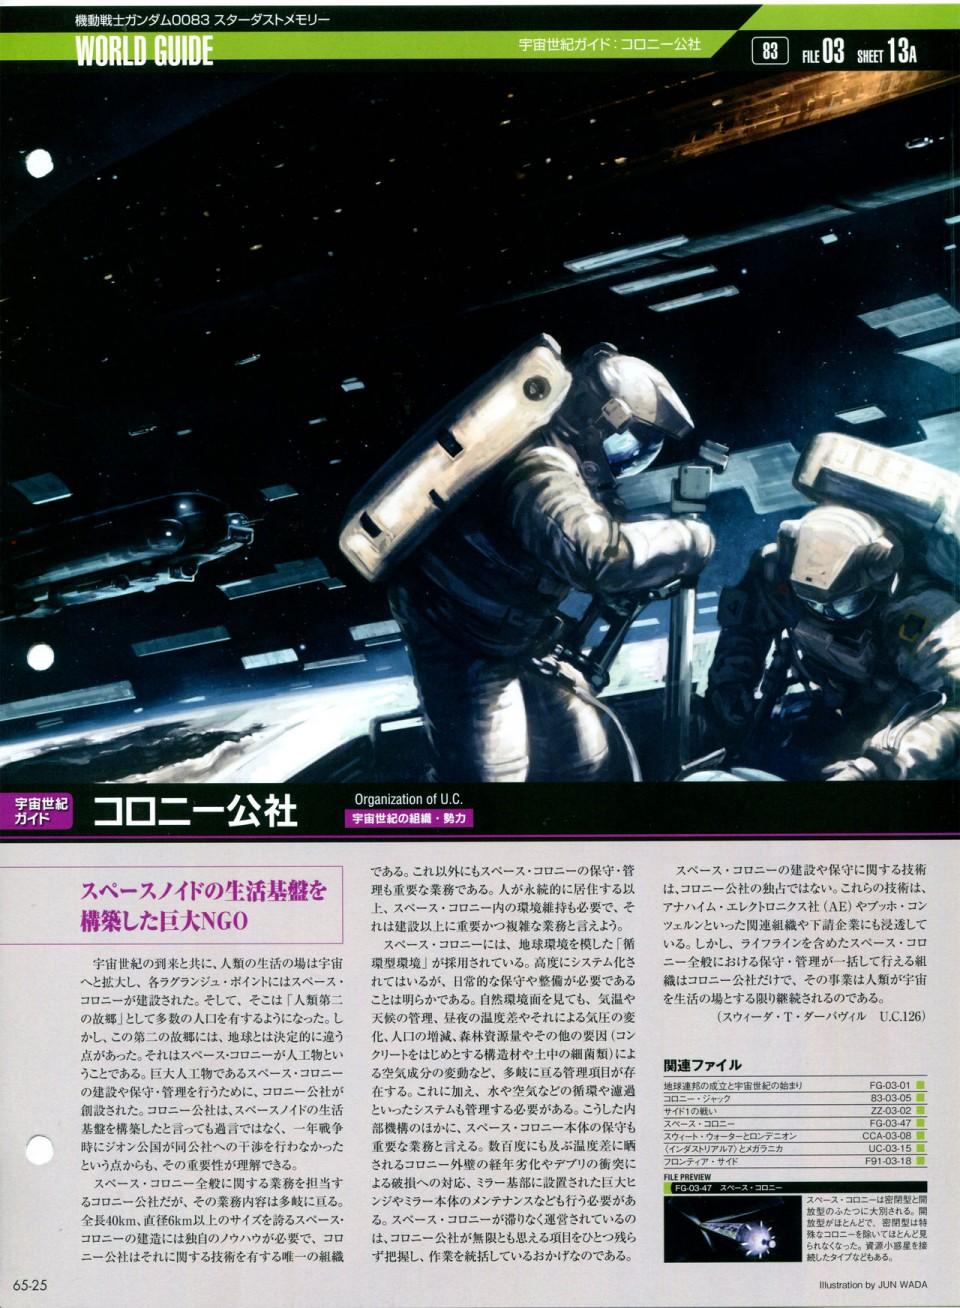 The Official Gundam Perfect File  - 第65-67話(1/3) - 5